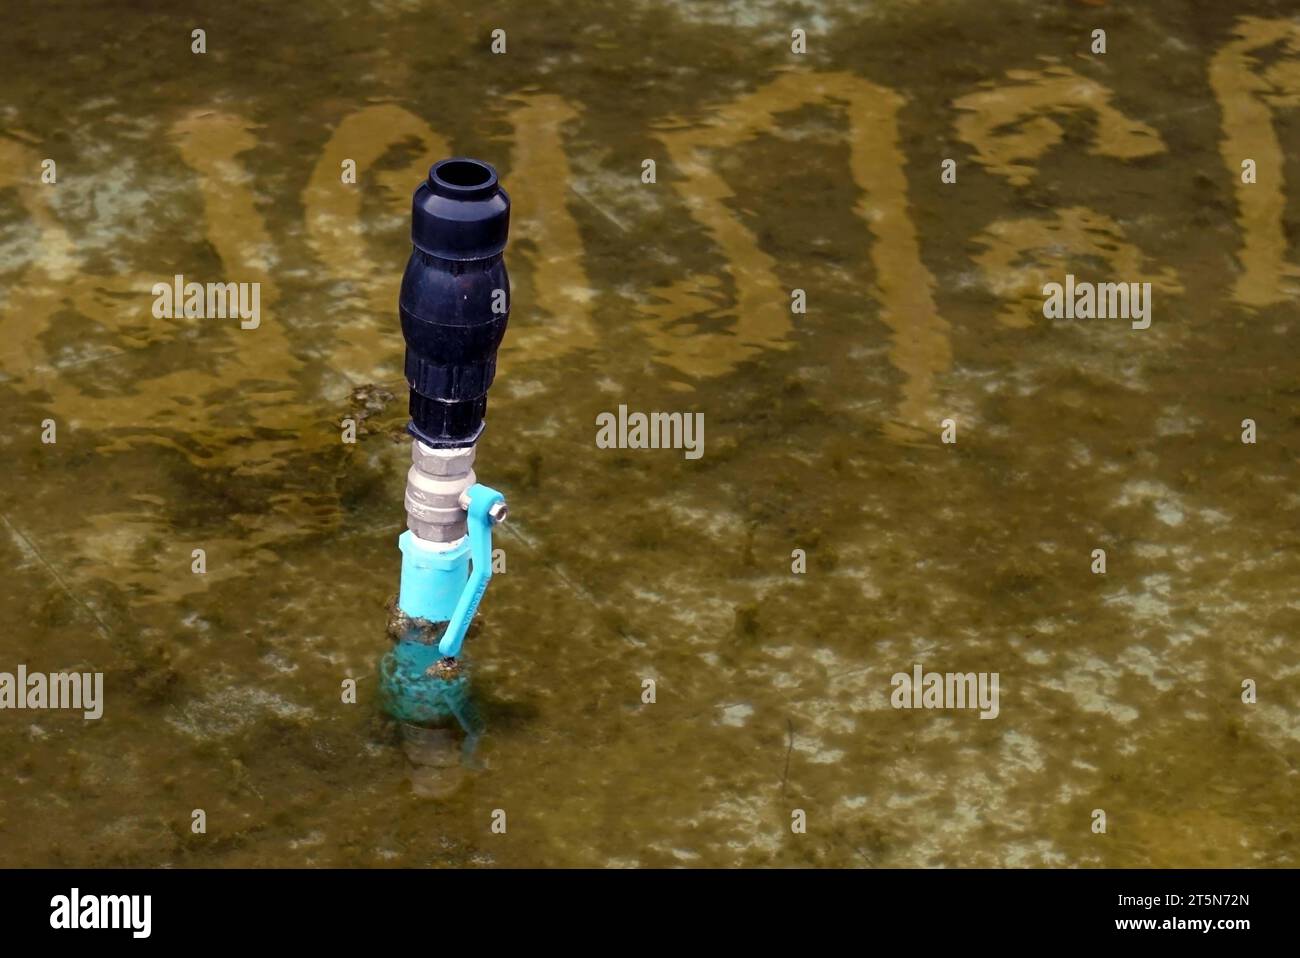 A water faucet in the rain, water supply system in bangkok Thailand. Stock Photo